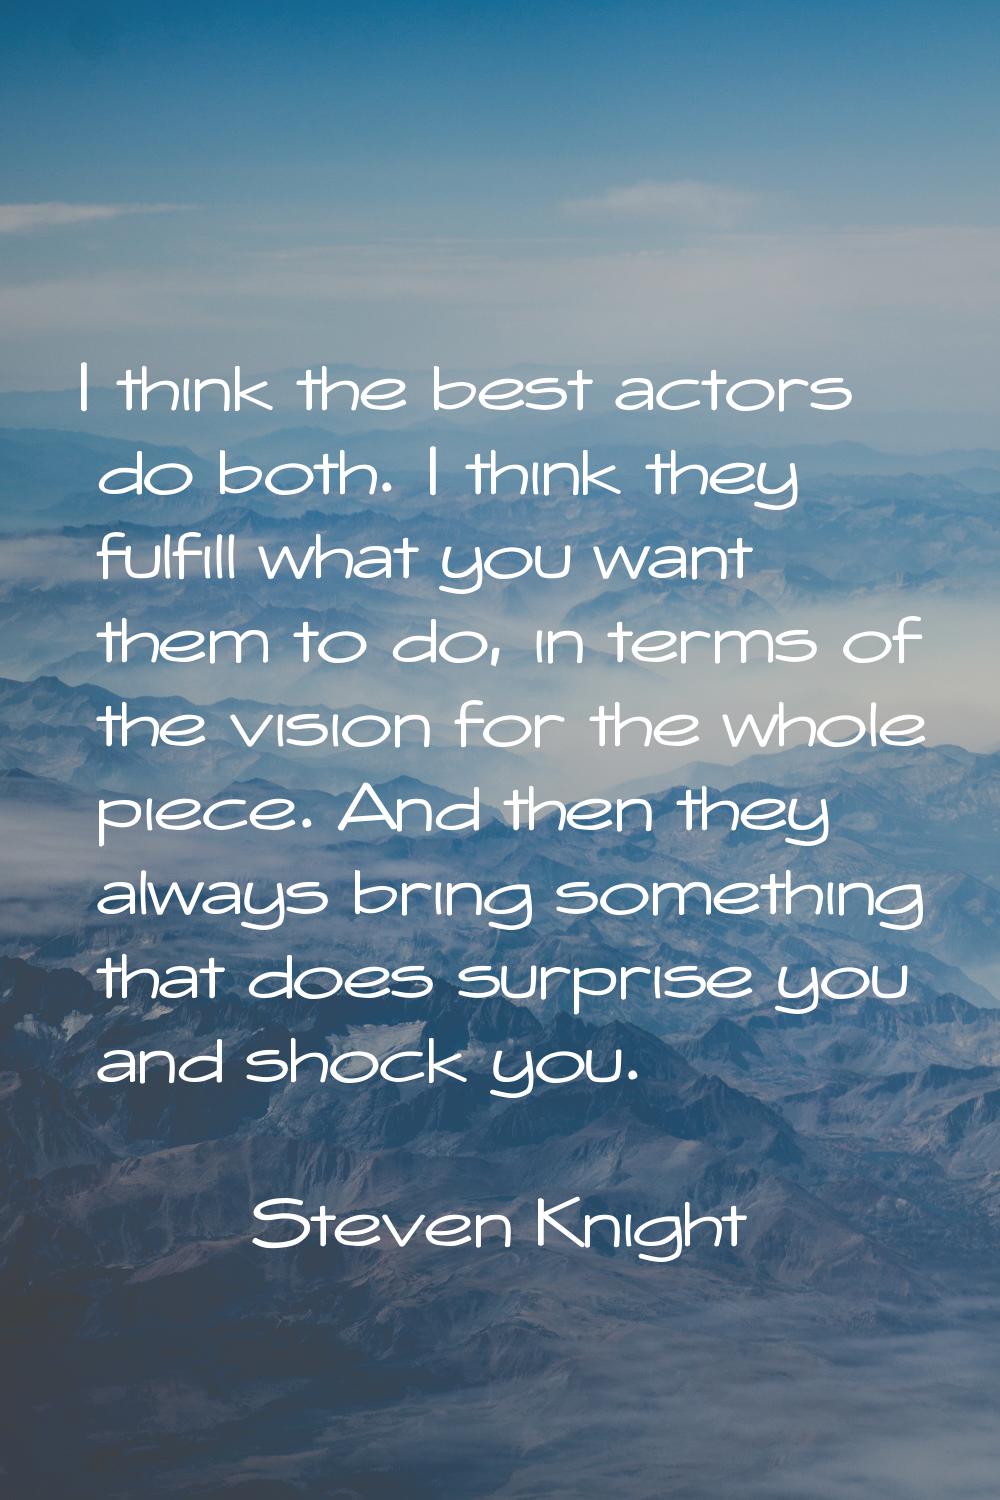 I think the best actors do both. I think they fulfill what you want them to do, in terms of the vis